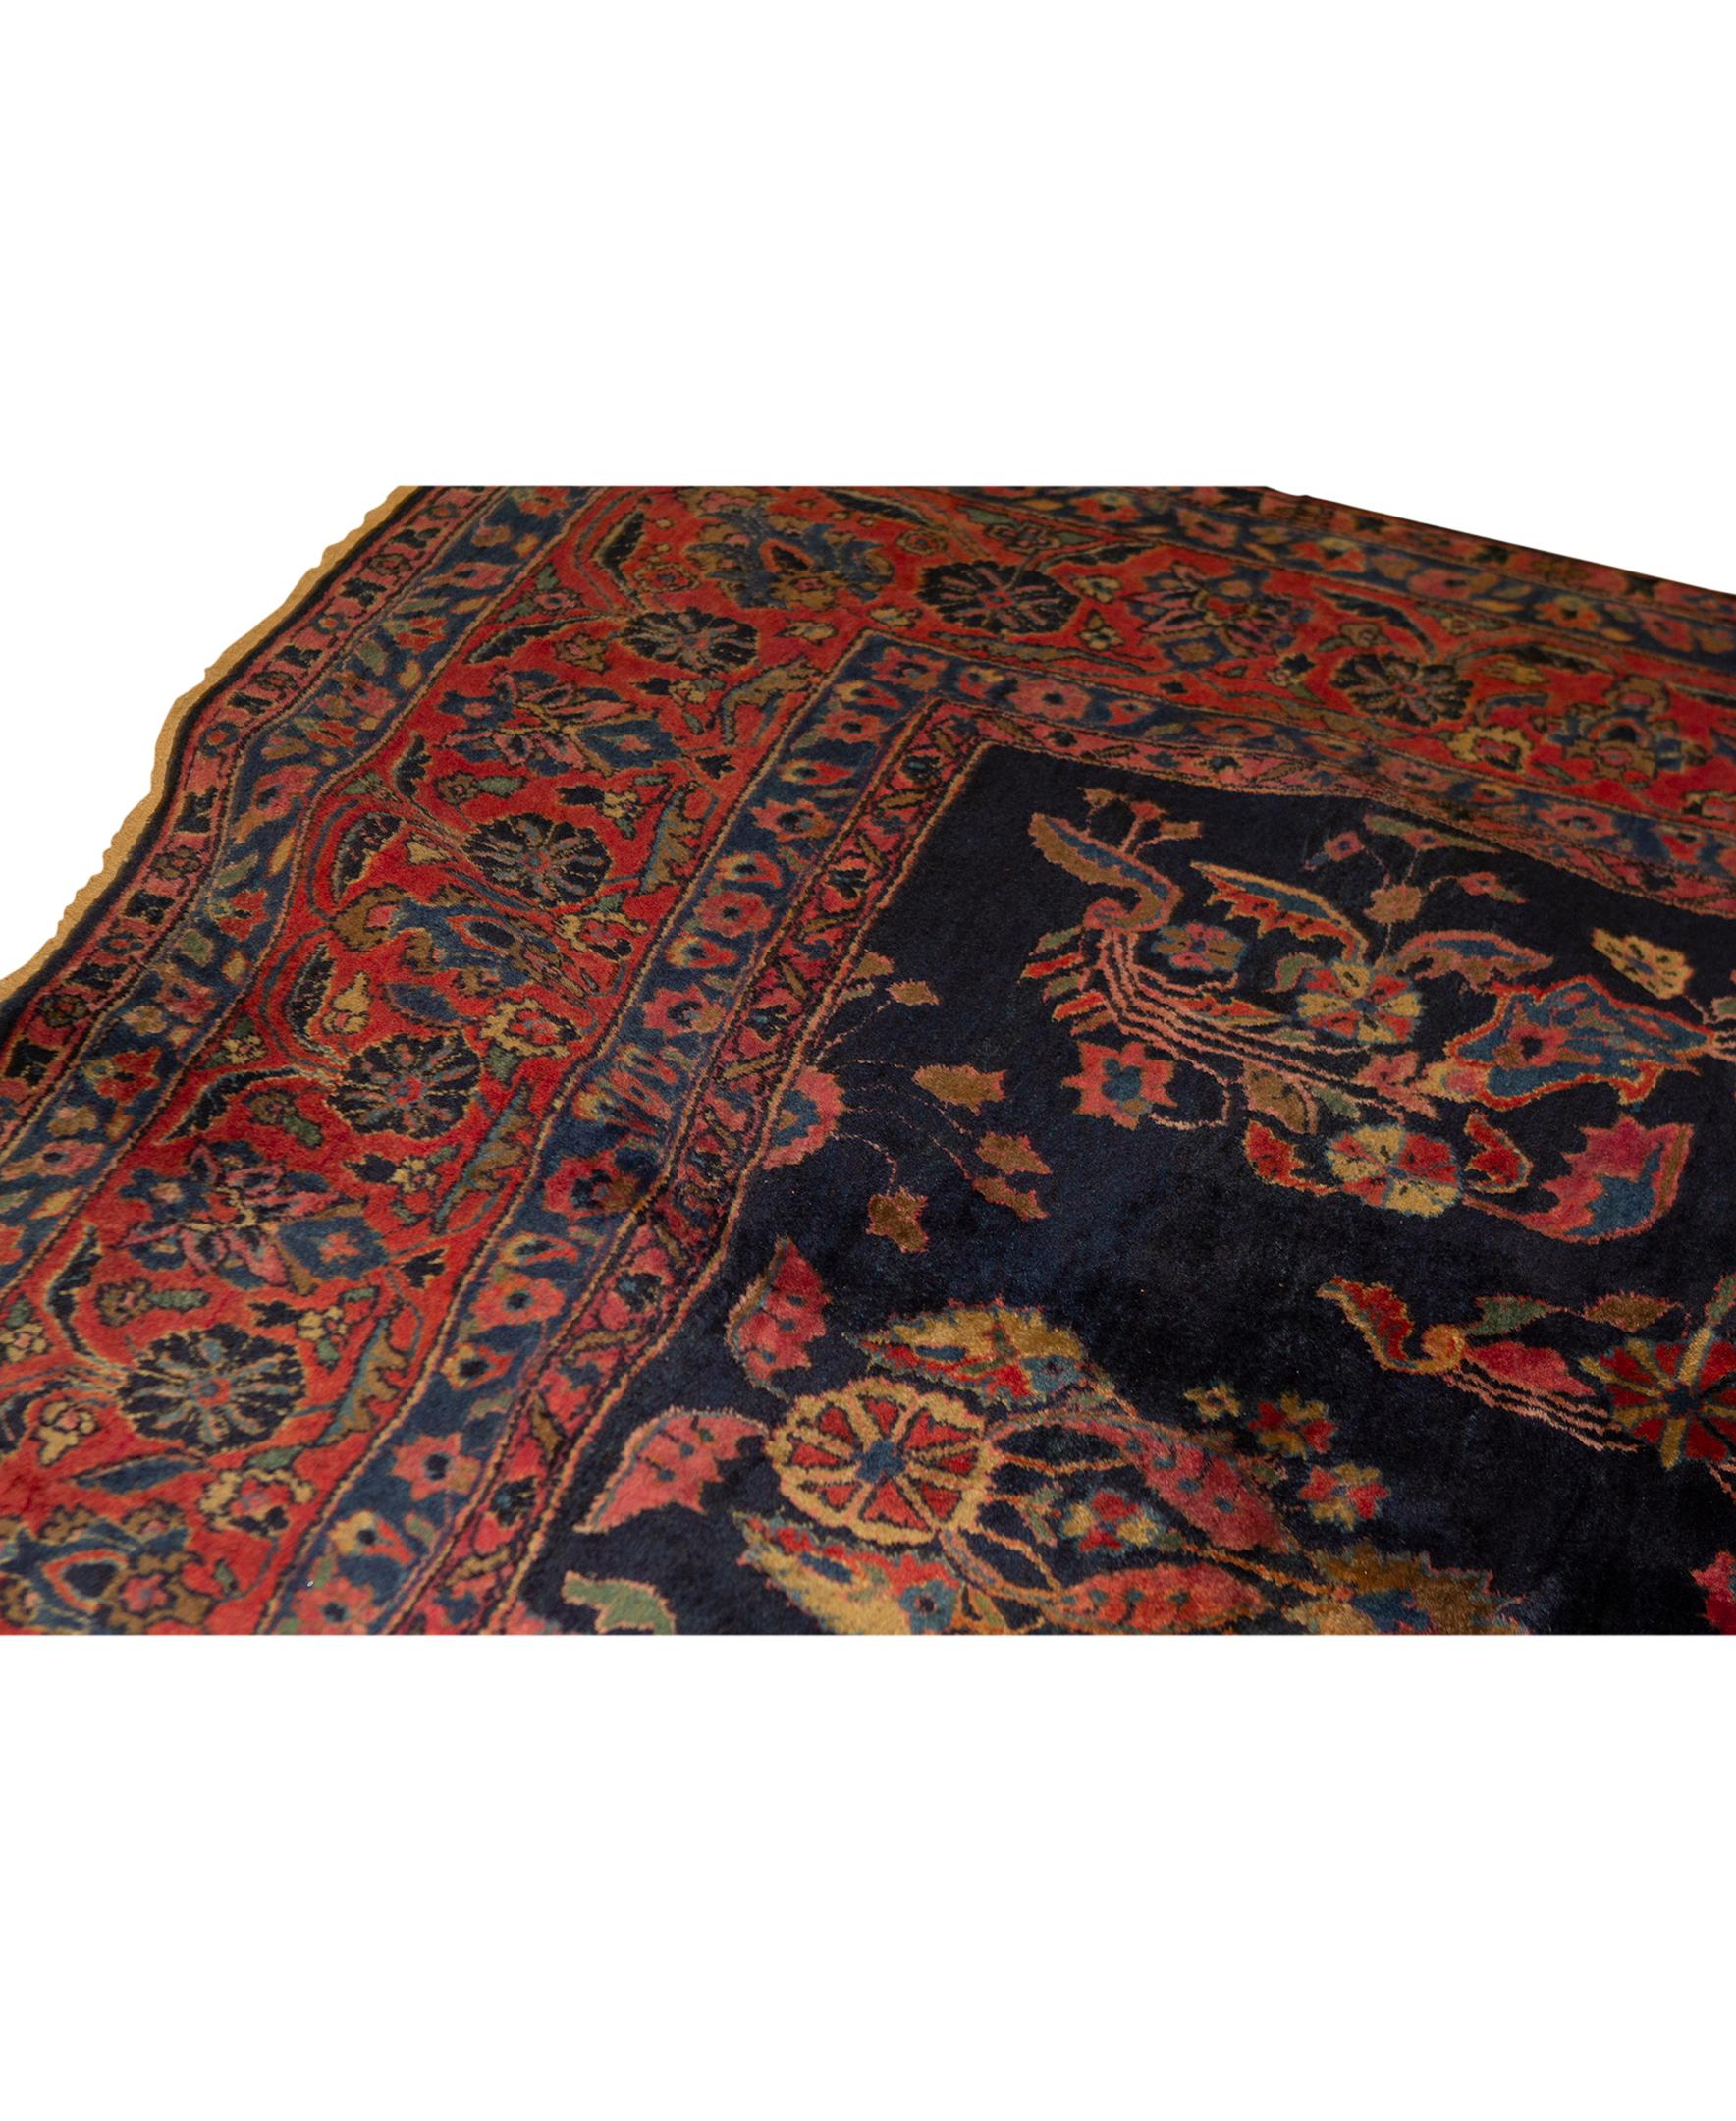   Antique Persian Fine Traditional Handwoven Luxury Wool Navy / Rust Rug.Size: 9' X 12'
